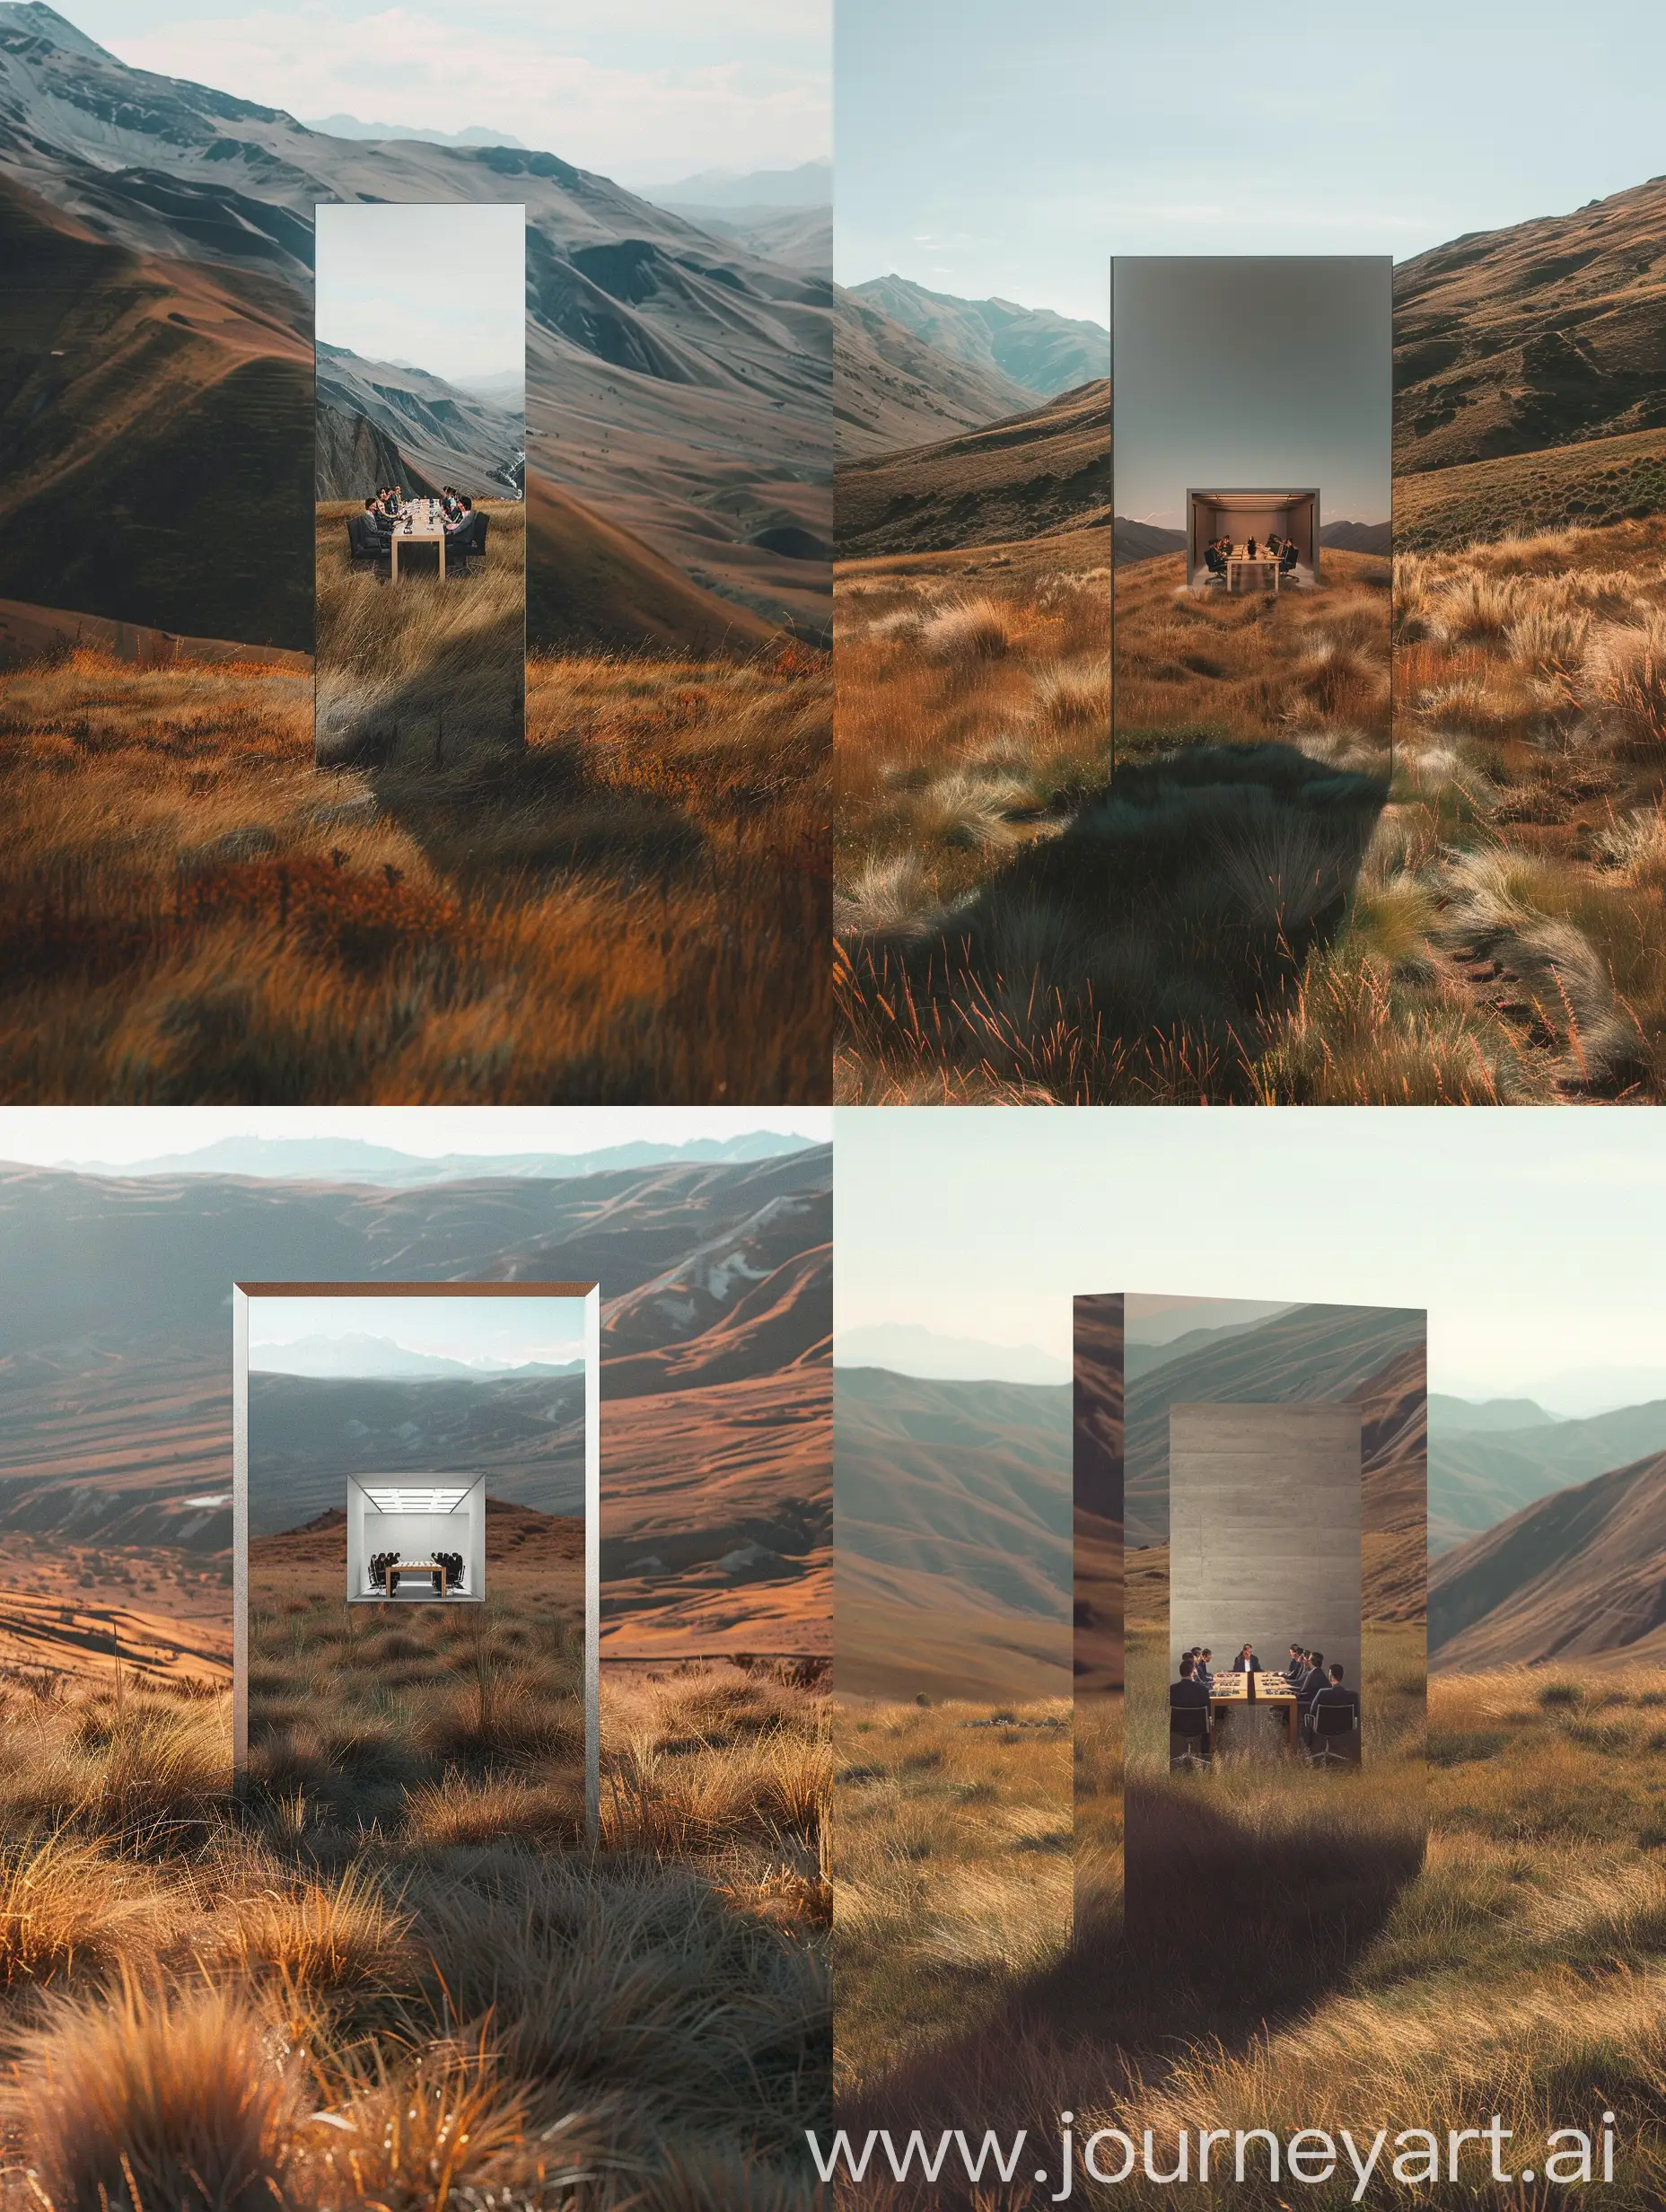 In a stunningly beautiful, vast, and undulating high mountain meadow, with changing contours of distant mountains and gorgeous natural scenery, there stands a large rectangular mirror upright at 90 degrees in the center of the scene. The front of the mirror faces directly towards the camera. The mirror has no frame, only the pure mirror surface itself, and it is set among the grasses. There are no living creatures on the meadow, and the mirror does not reflect the surrounding environment. Inside the mirror, there is a modernly decorated conference room styled similar to an Apple office--sleek and clean, with 8-10 people sitting around a conference table having a meeting. The camera angle is a pure frontal perspective, shot with a Canon 50mm lens.